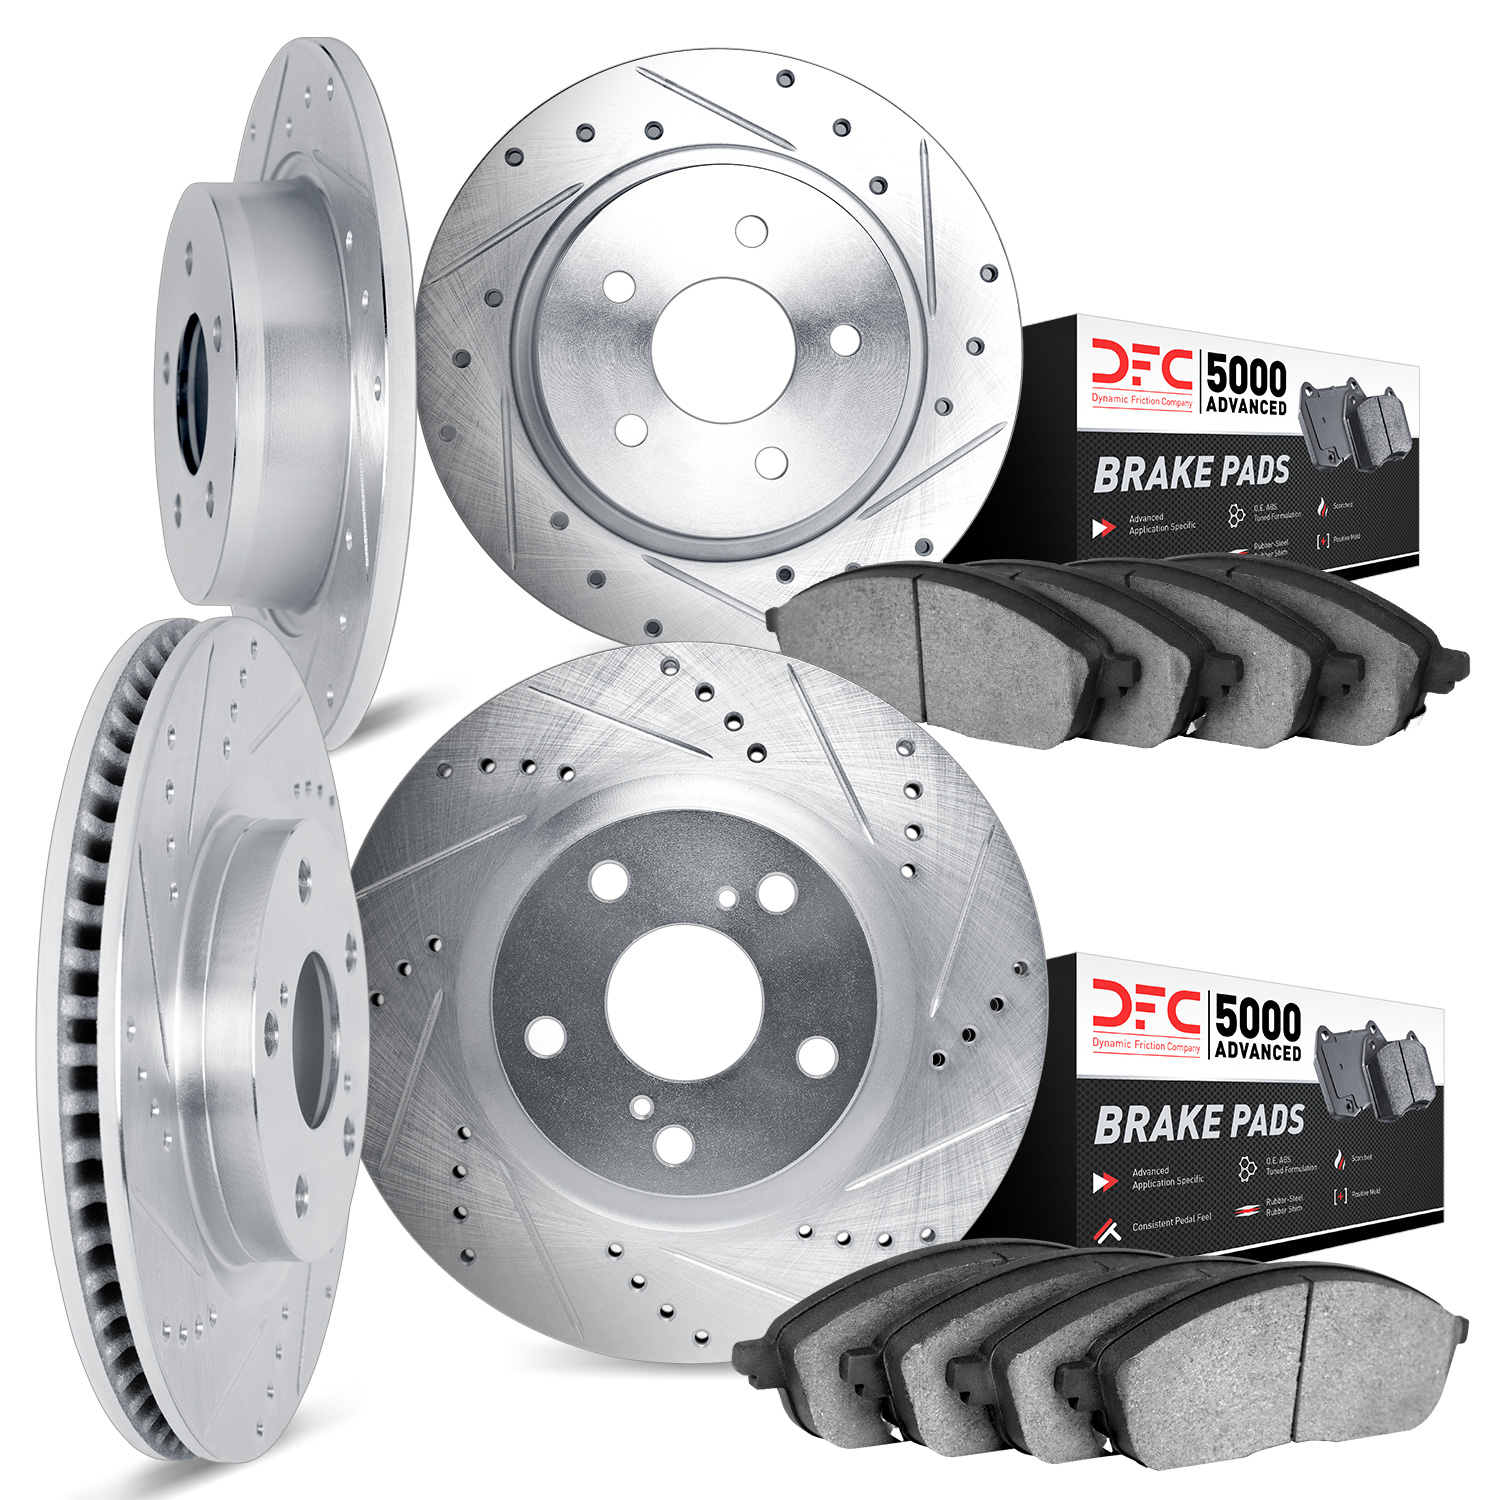 7504-42058 Drilled/Slotted Brake Rotors w/5000 Advanced Brake Pads Kit [Silver], Fits Select Mopar, Position: Front and Rear